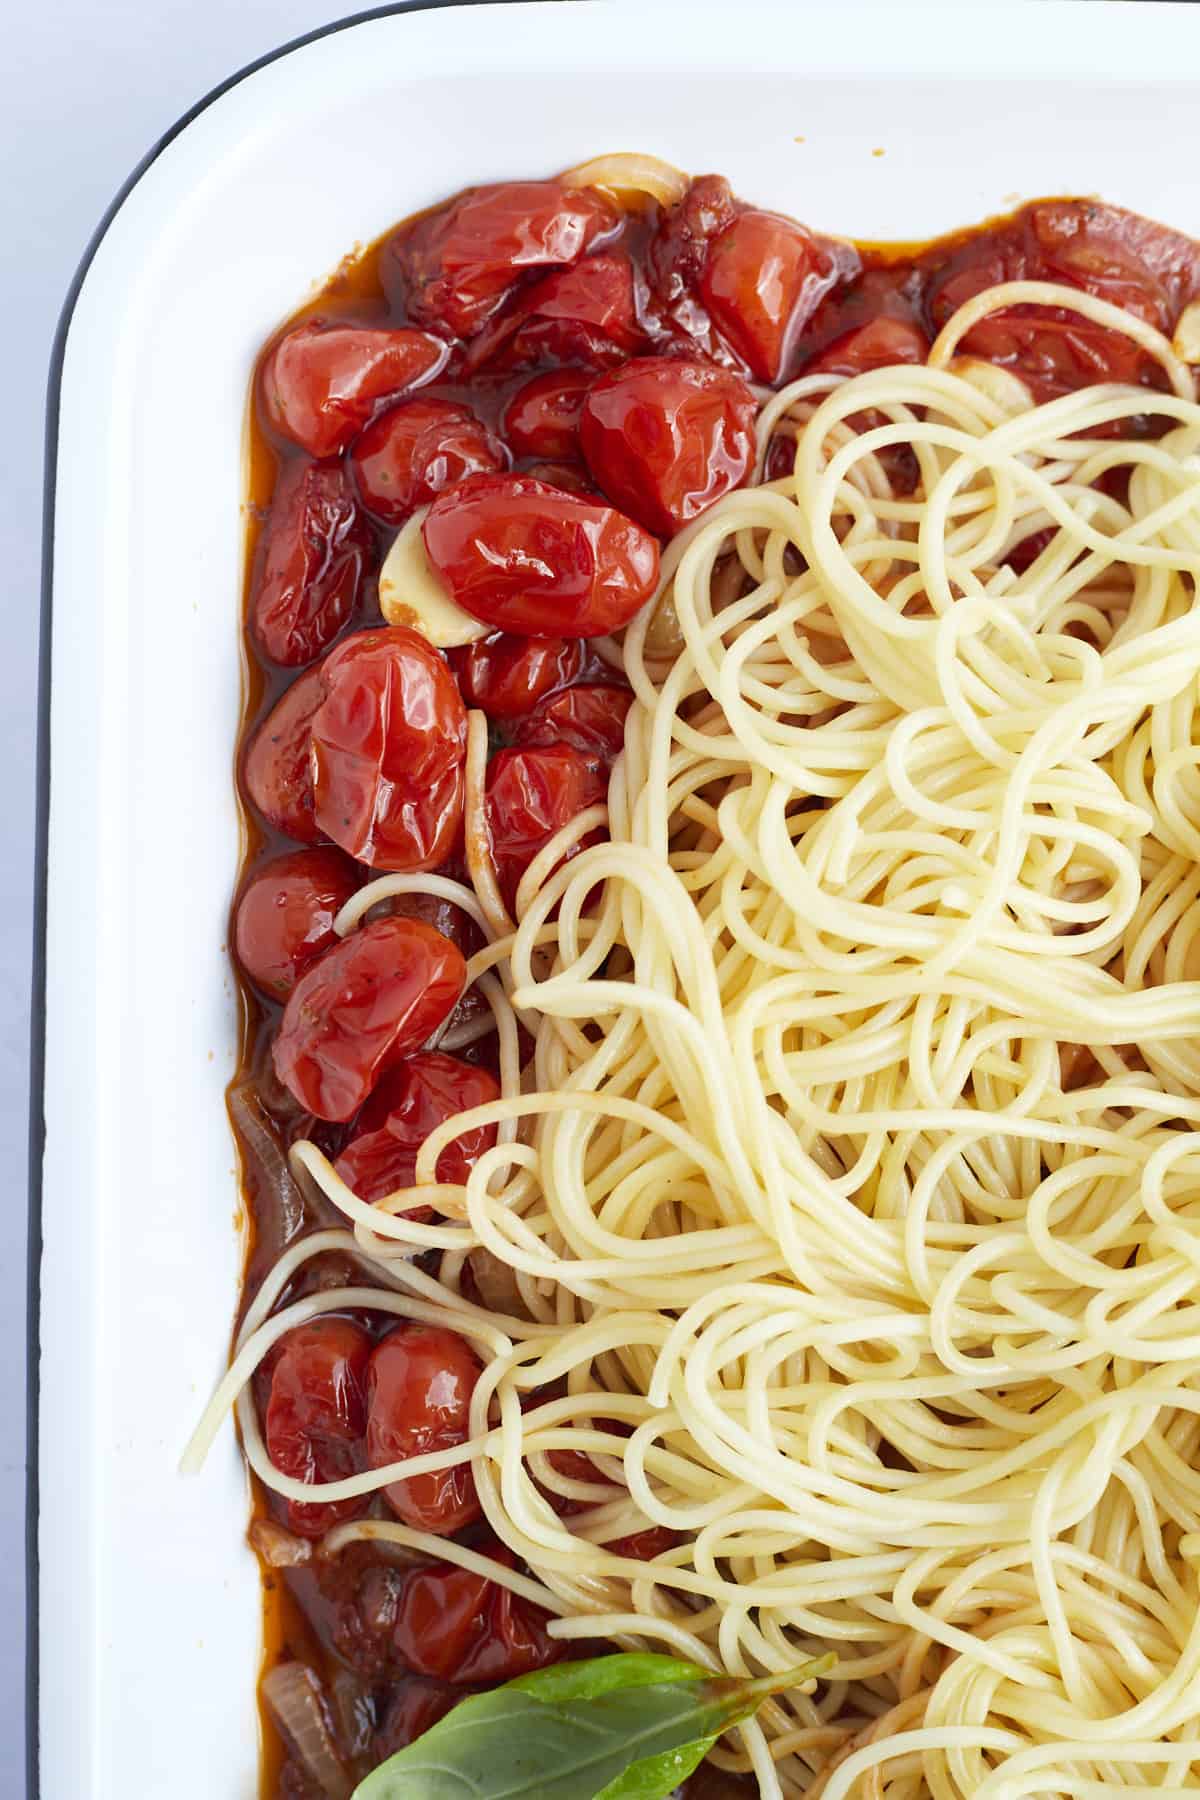 Cooked spaghetti noodles on top of roasted tomatoes, garlic cloves, and onions in a baking dish